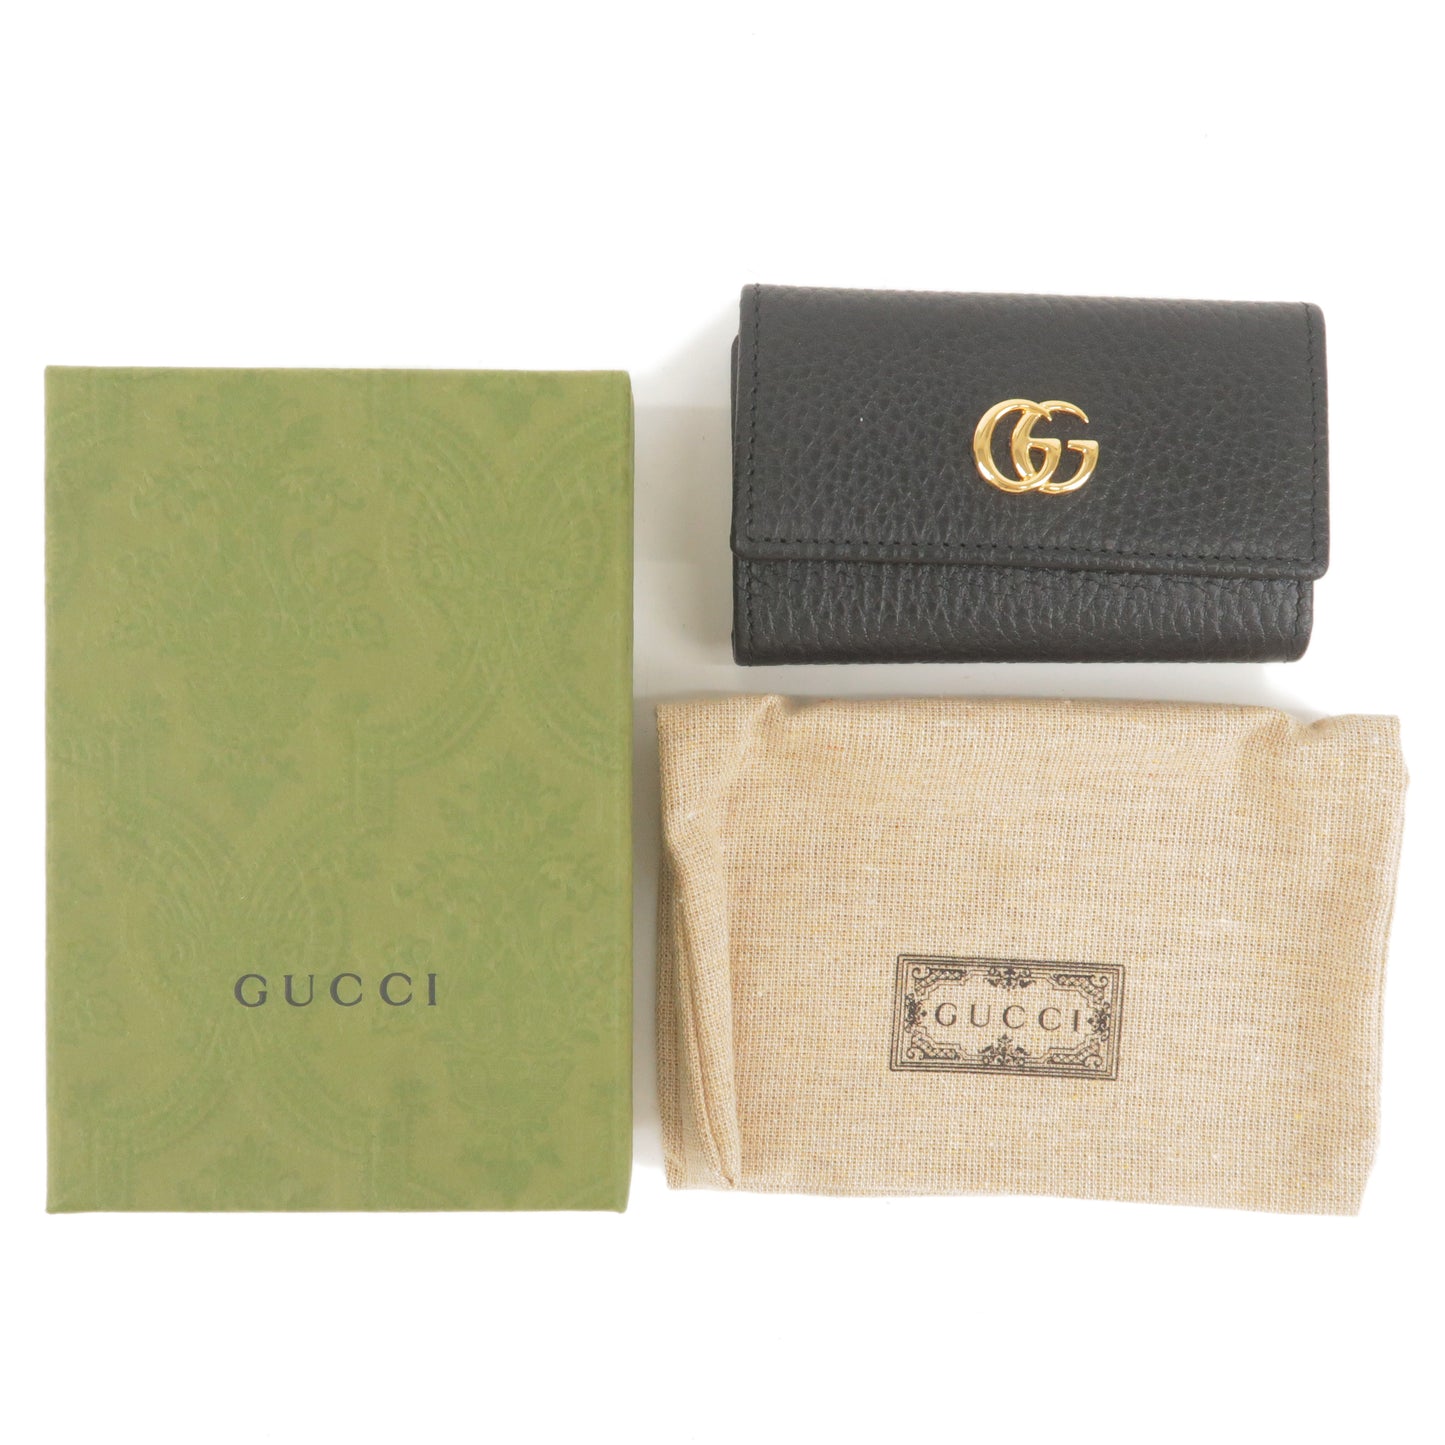 GUCCI GG Marmont Leather 6 Rings Key Case Key Holder Black 456118